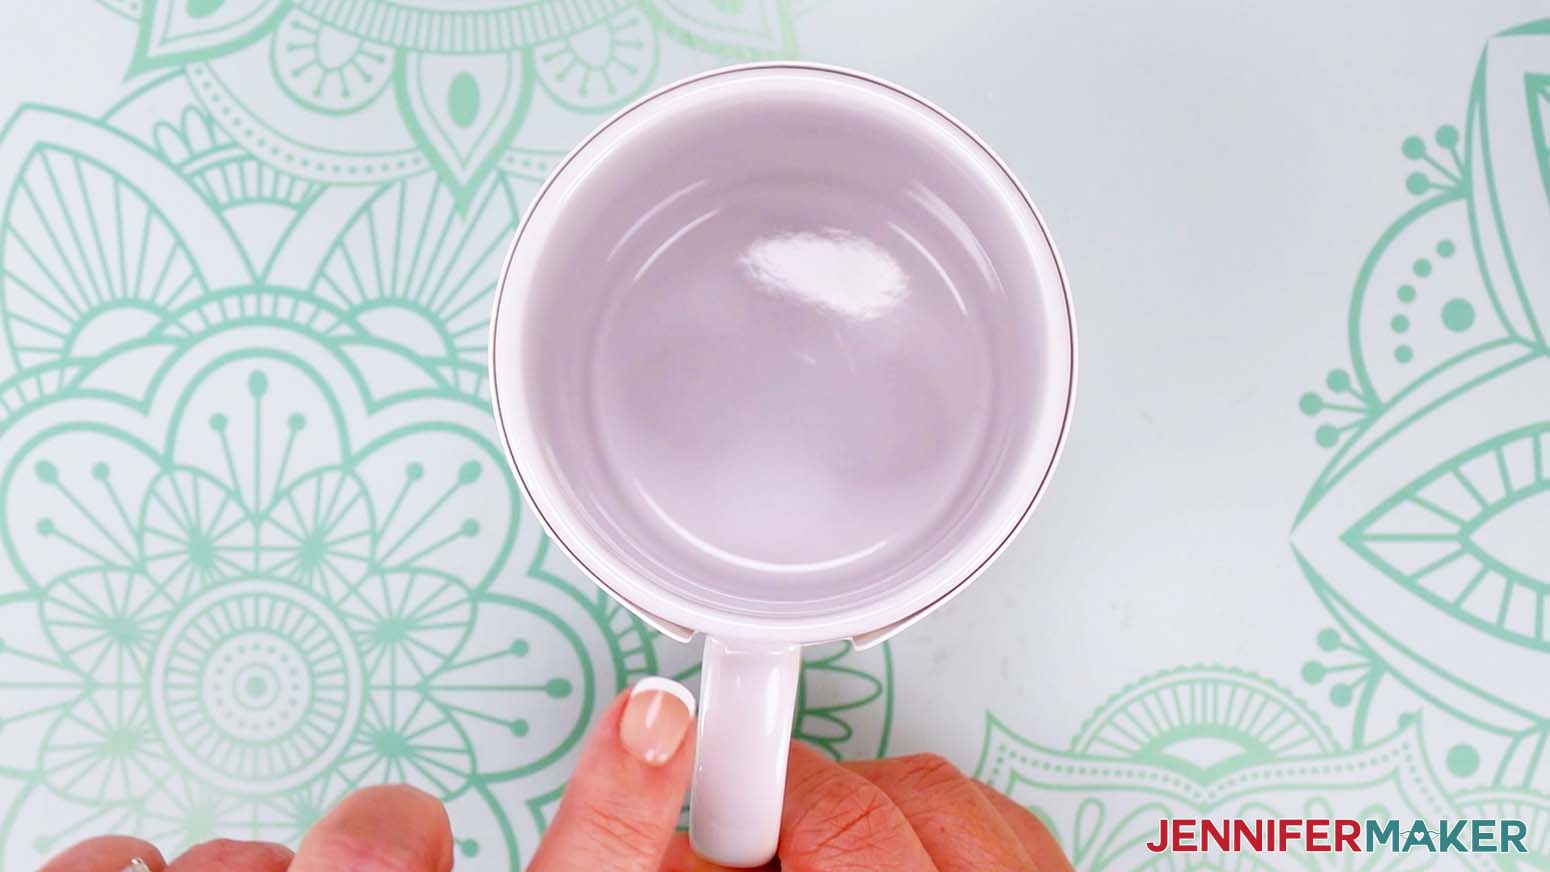 Check if the thicker paper is allowing the edges near the handle to lift away from the mug. NOTE: The thick paper might lift a little on the shaped ends, and any gaps can let the ink escape when the heat turns it into a gas.